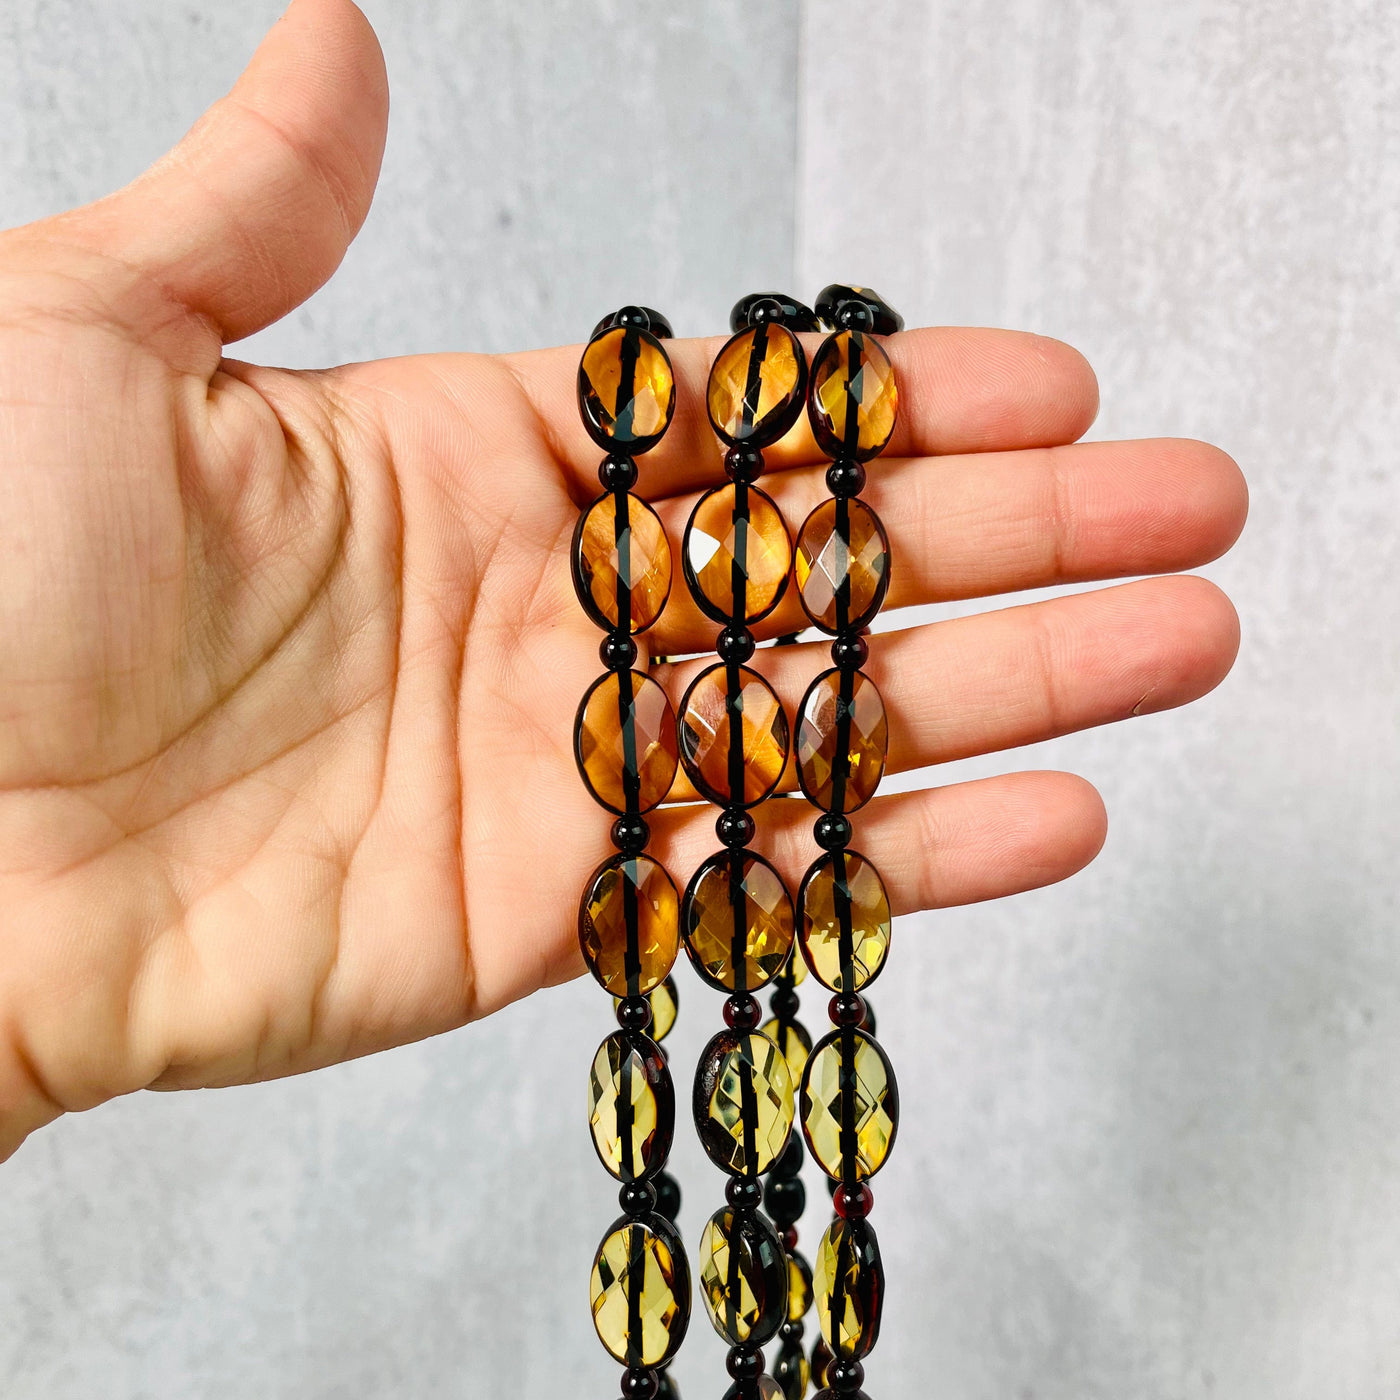 Three Baltic Amber Beaded Necklaces hanging over a woman's hand.